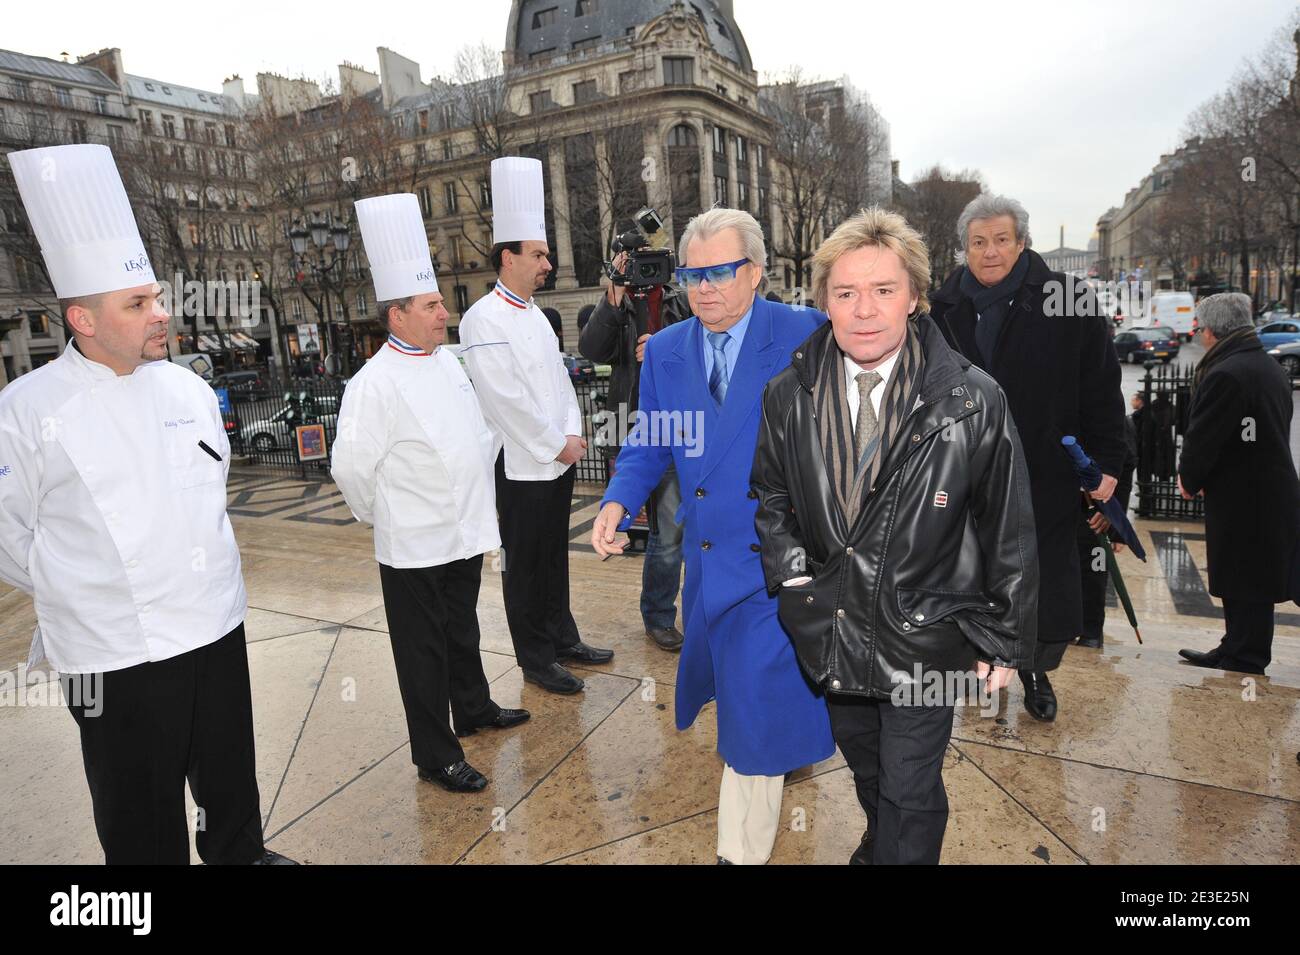 Michou and Yvan arriving at the tribute to French master pastry chef Gaston Lenotre during a mass at the Madeleine church in Paris, France on January 13, 2009. Gaston Lenotre, who built a worldwide empire with his gourmet dessert creations that defined modern patisserie, died on January 8, 2009 at the age of 88. Photo by Mousse/ABACAPRESS.COM Stock Photo